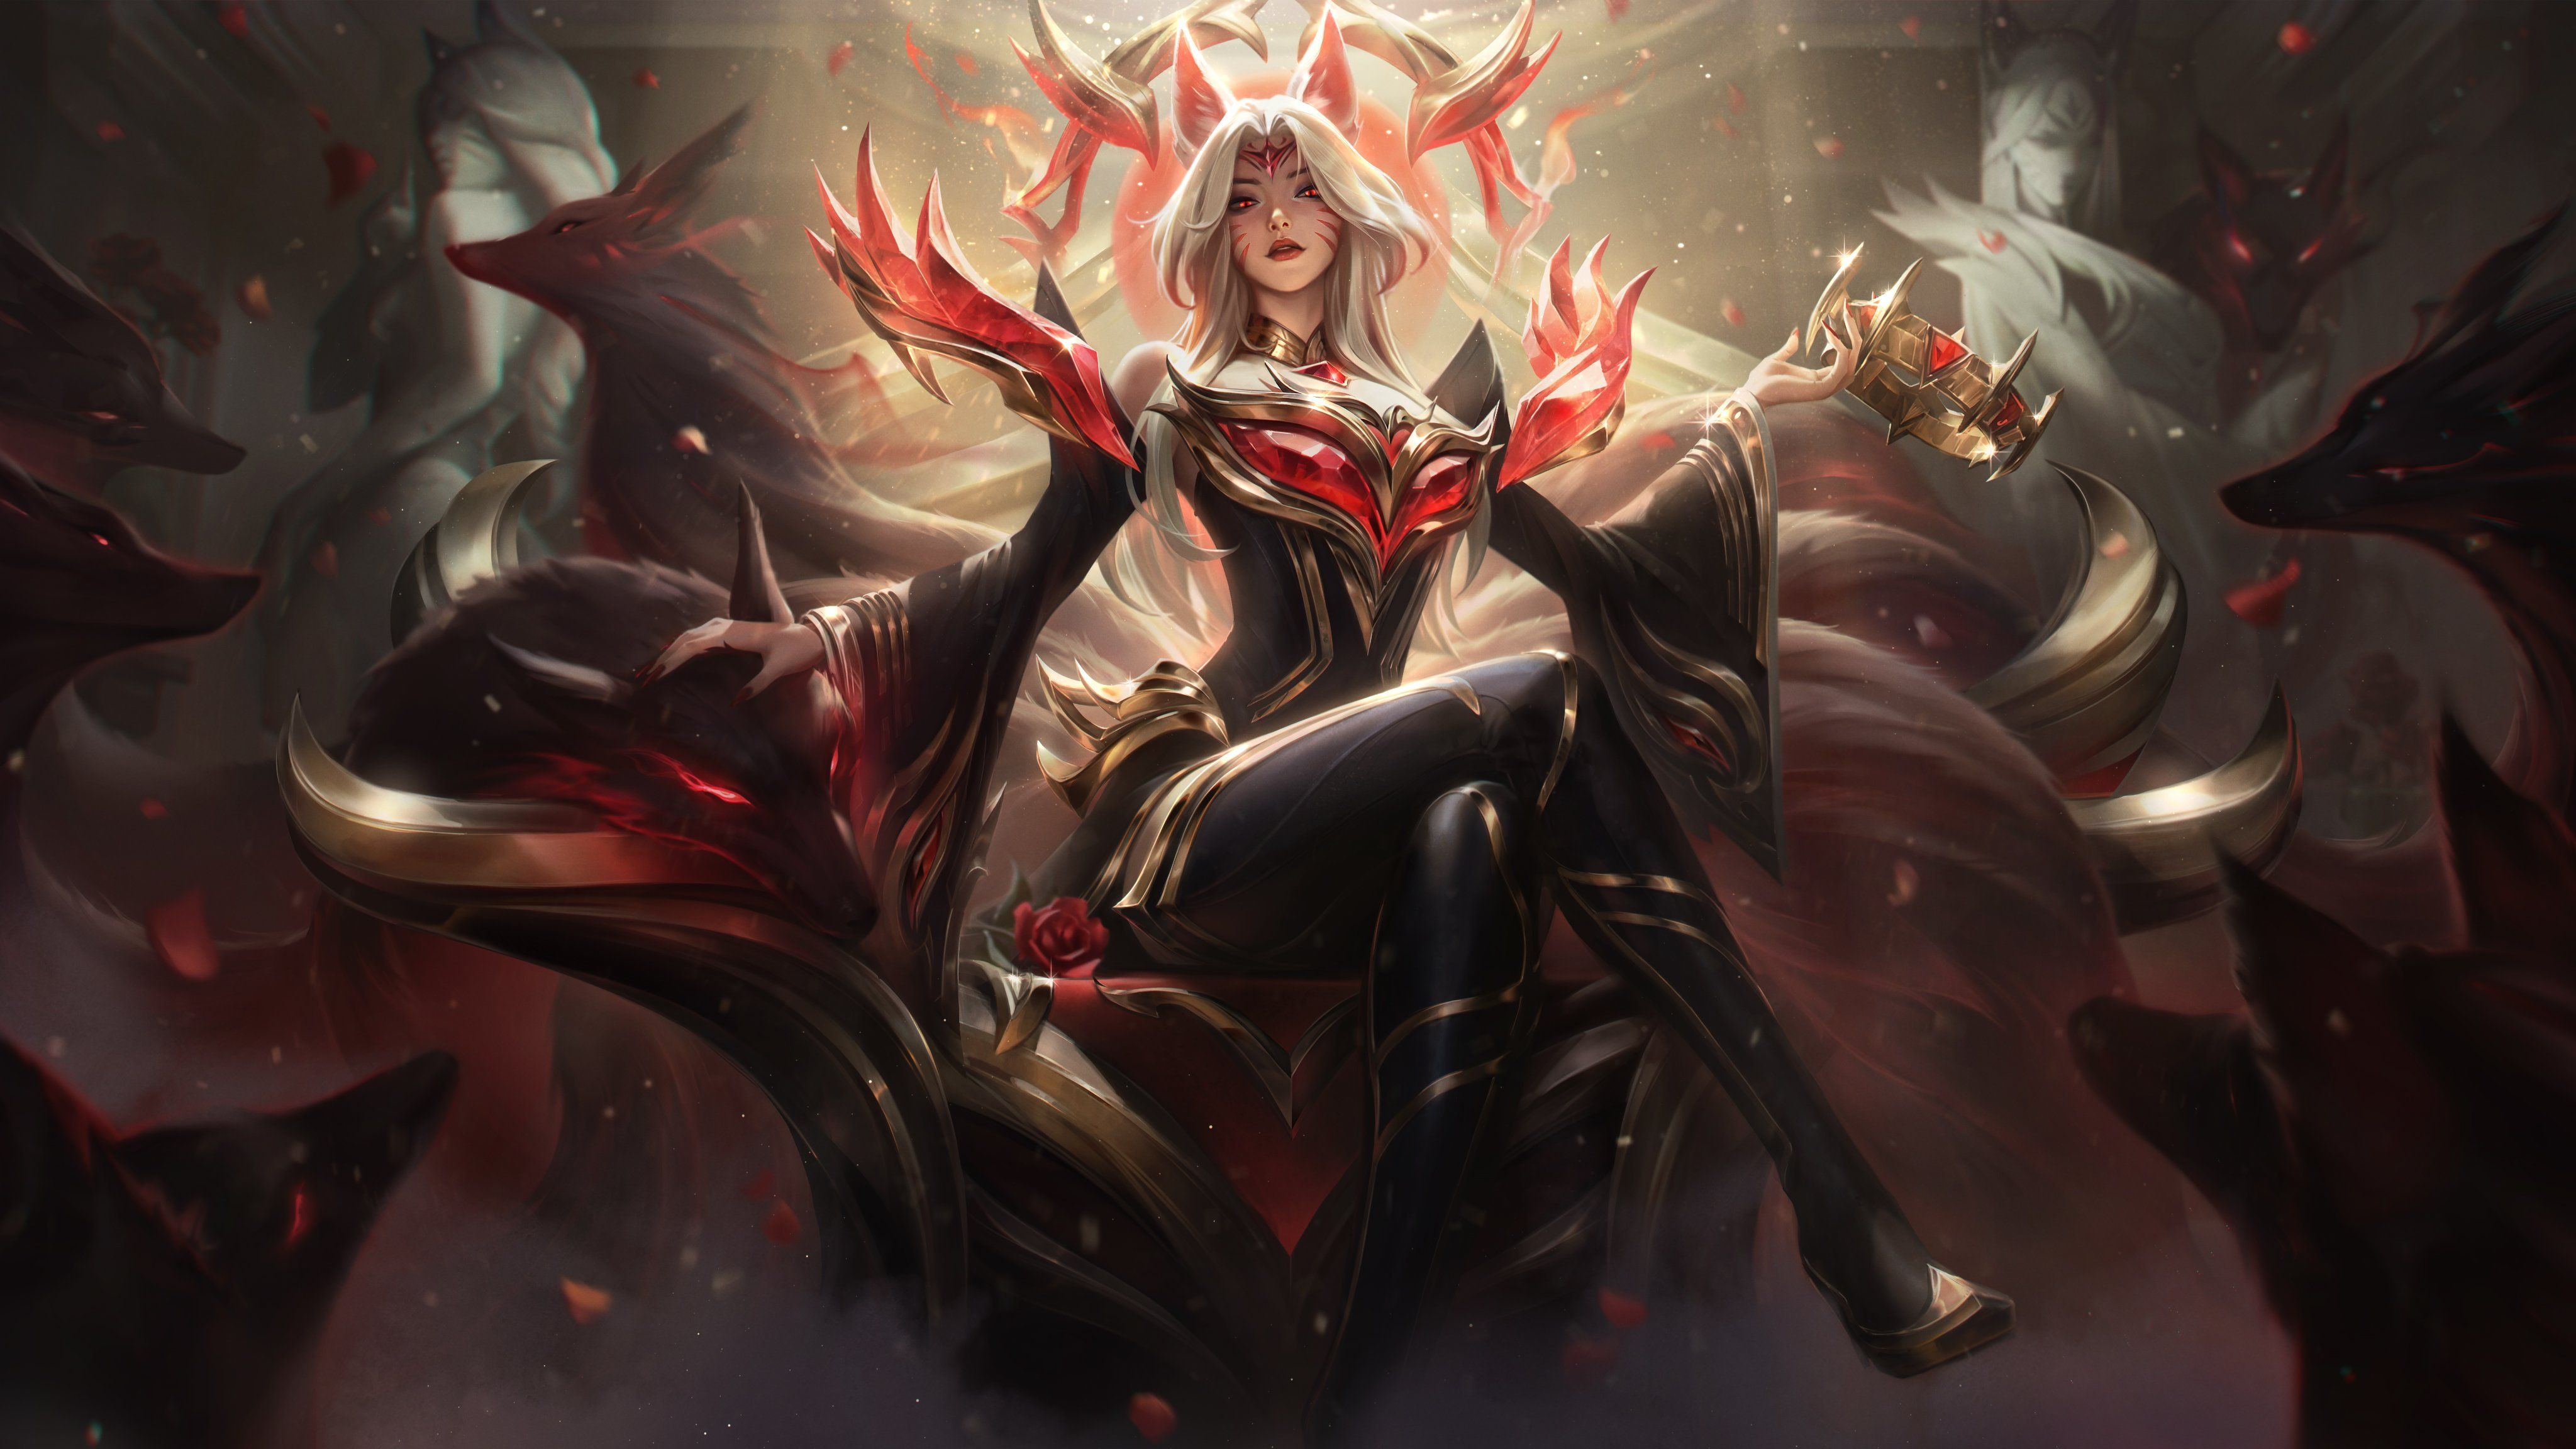 T1 Faker Ahri And Leblanc Hall Of Legends Skins Details Release Date Price Splashes And In Game 0505